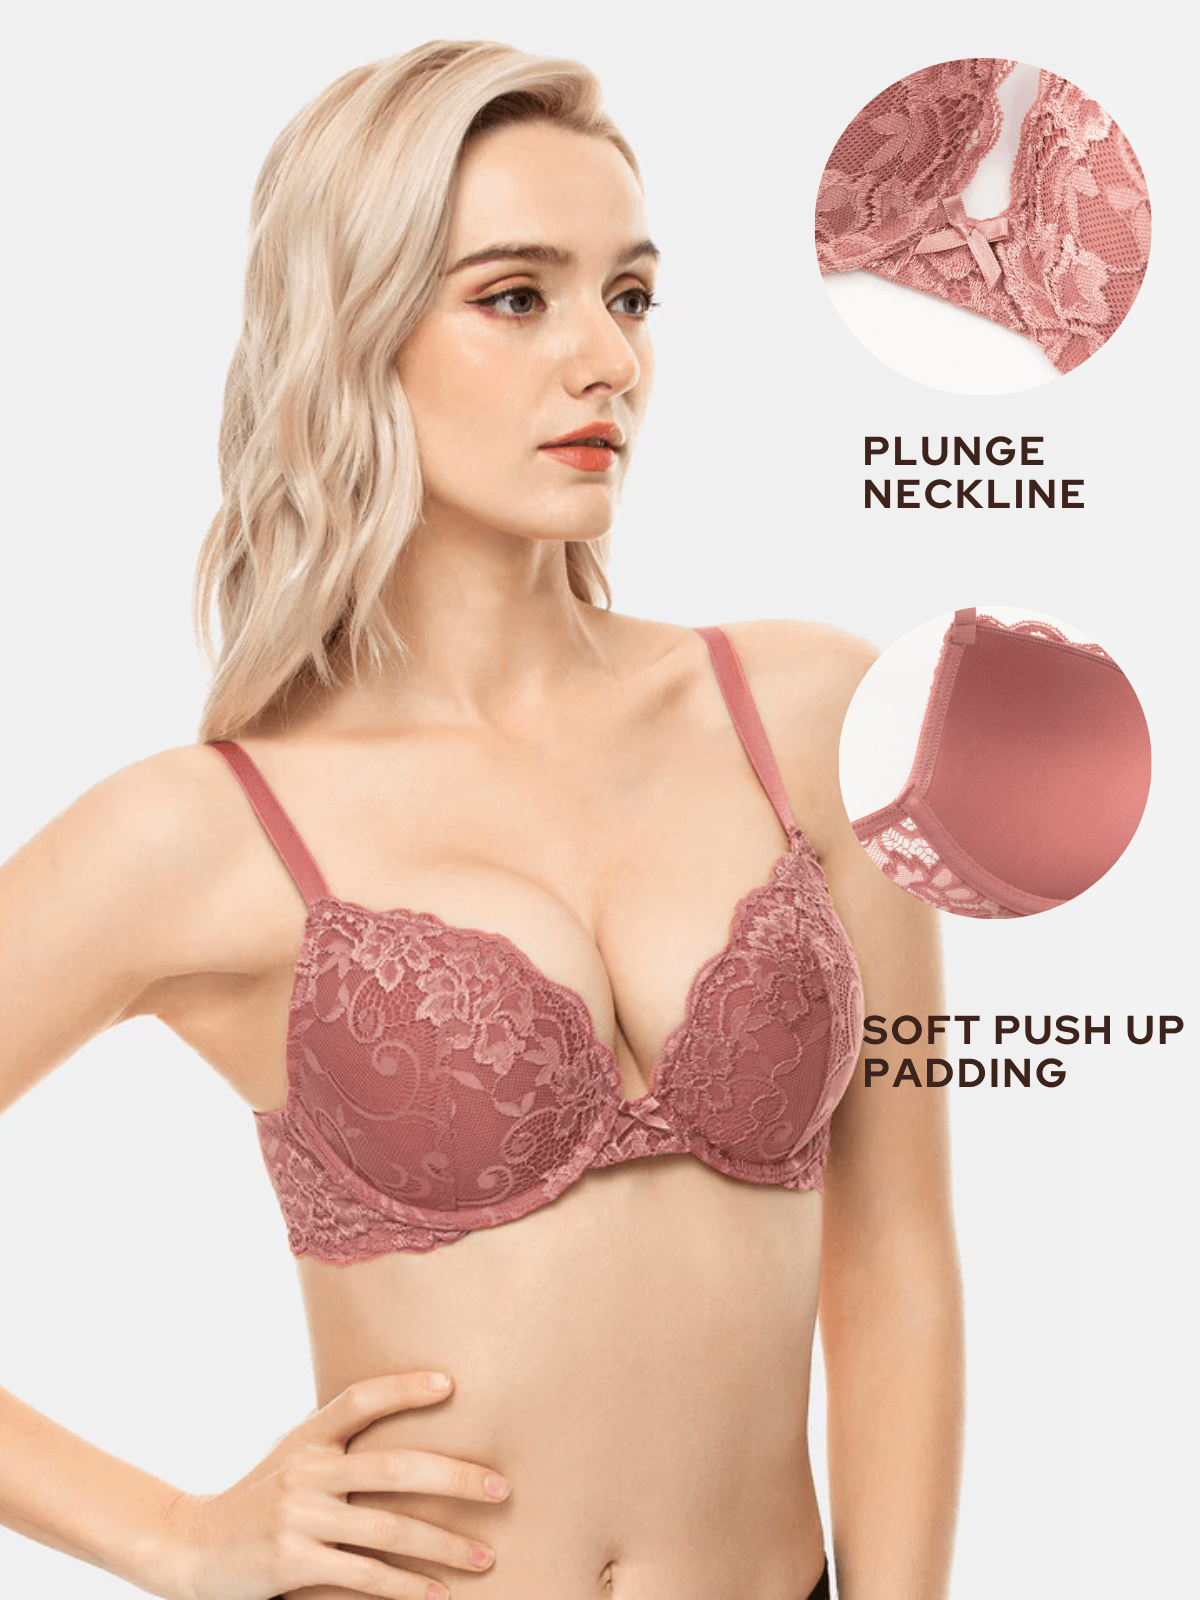 Level-3 Push-Up Padded Underwired Demi Cup Bra in Red - Lace